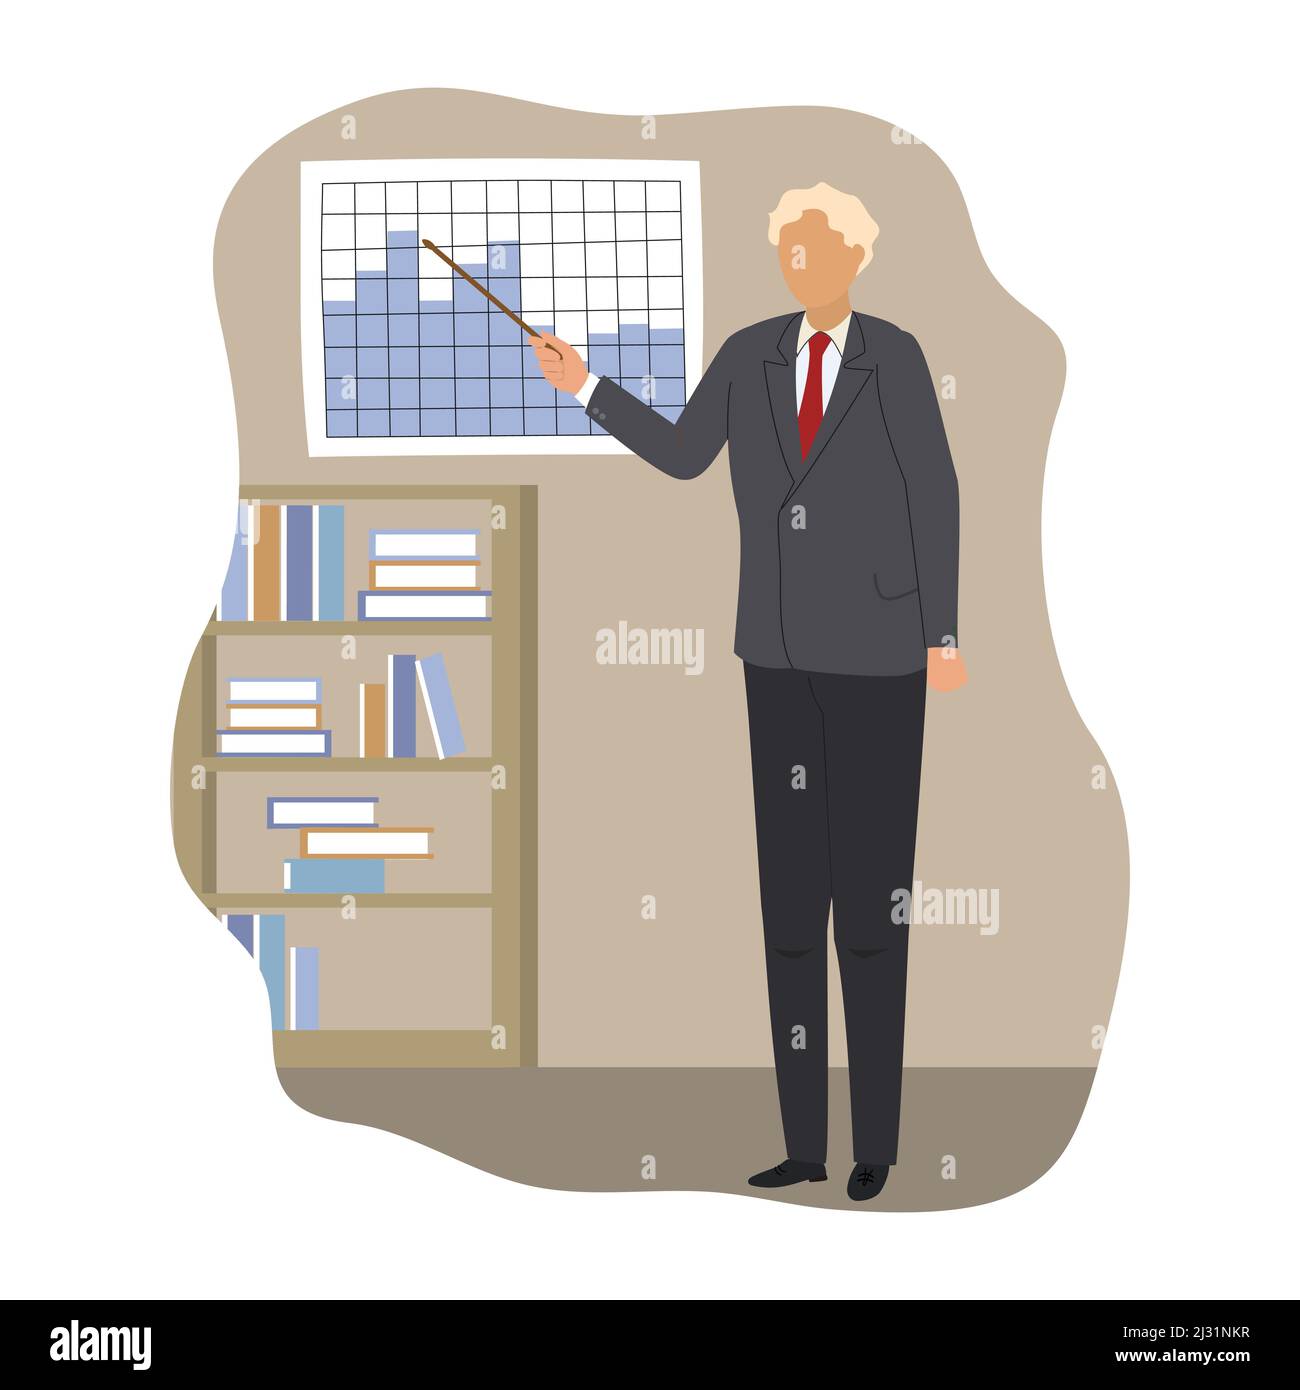 flip chart with drawing business charts Stock Photo - Alamy